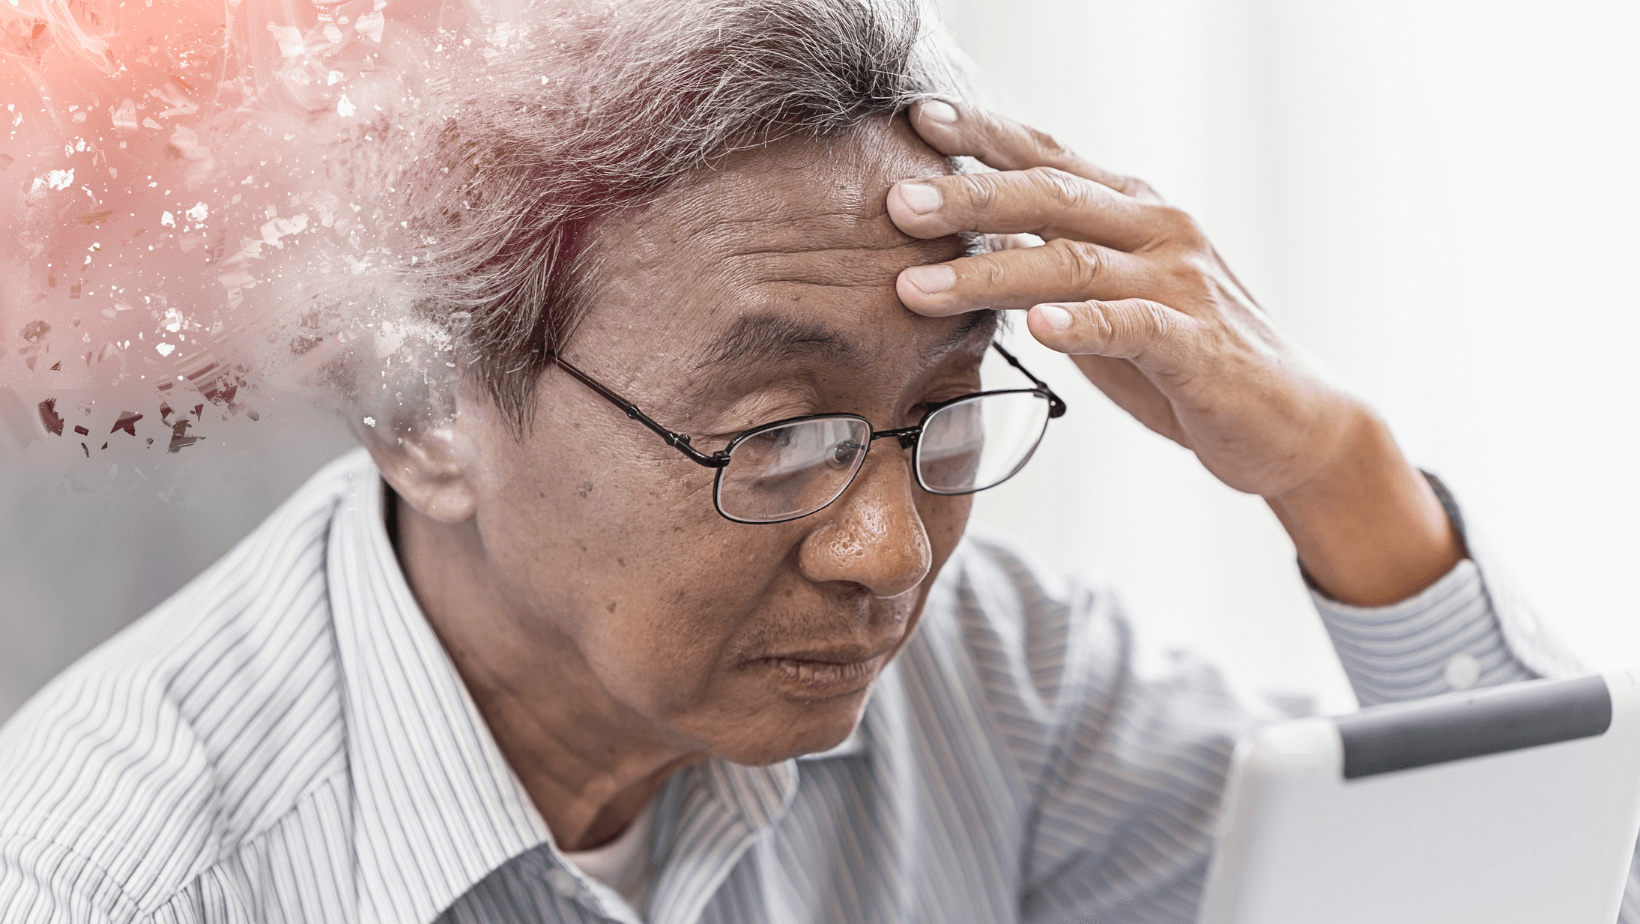 An older man of Asian descent grasps his head with his hand, representing aphasia resulting from Alzheimer's disease.